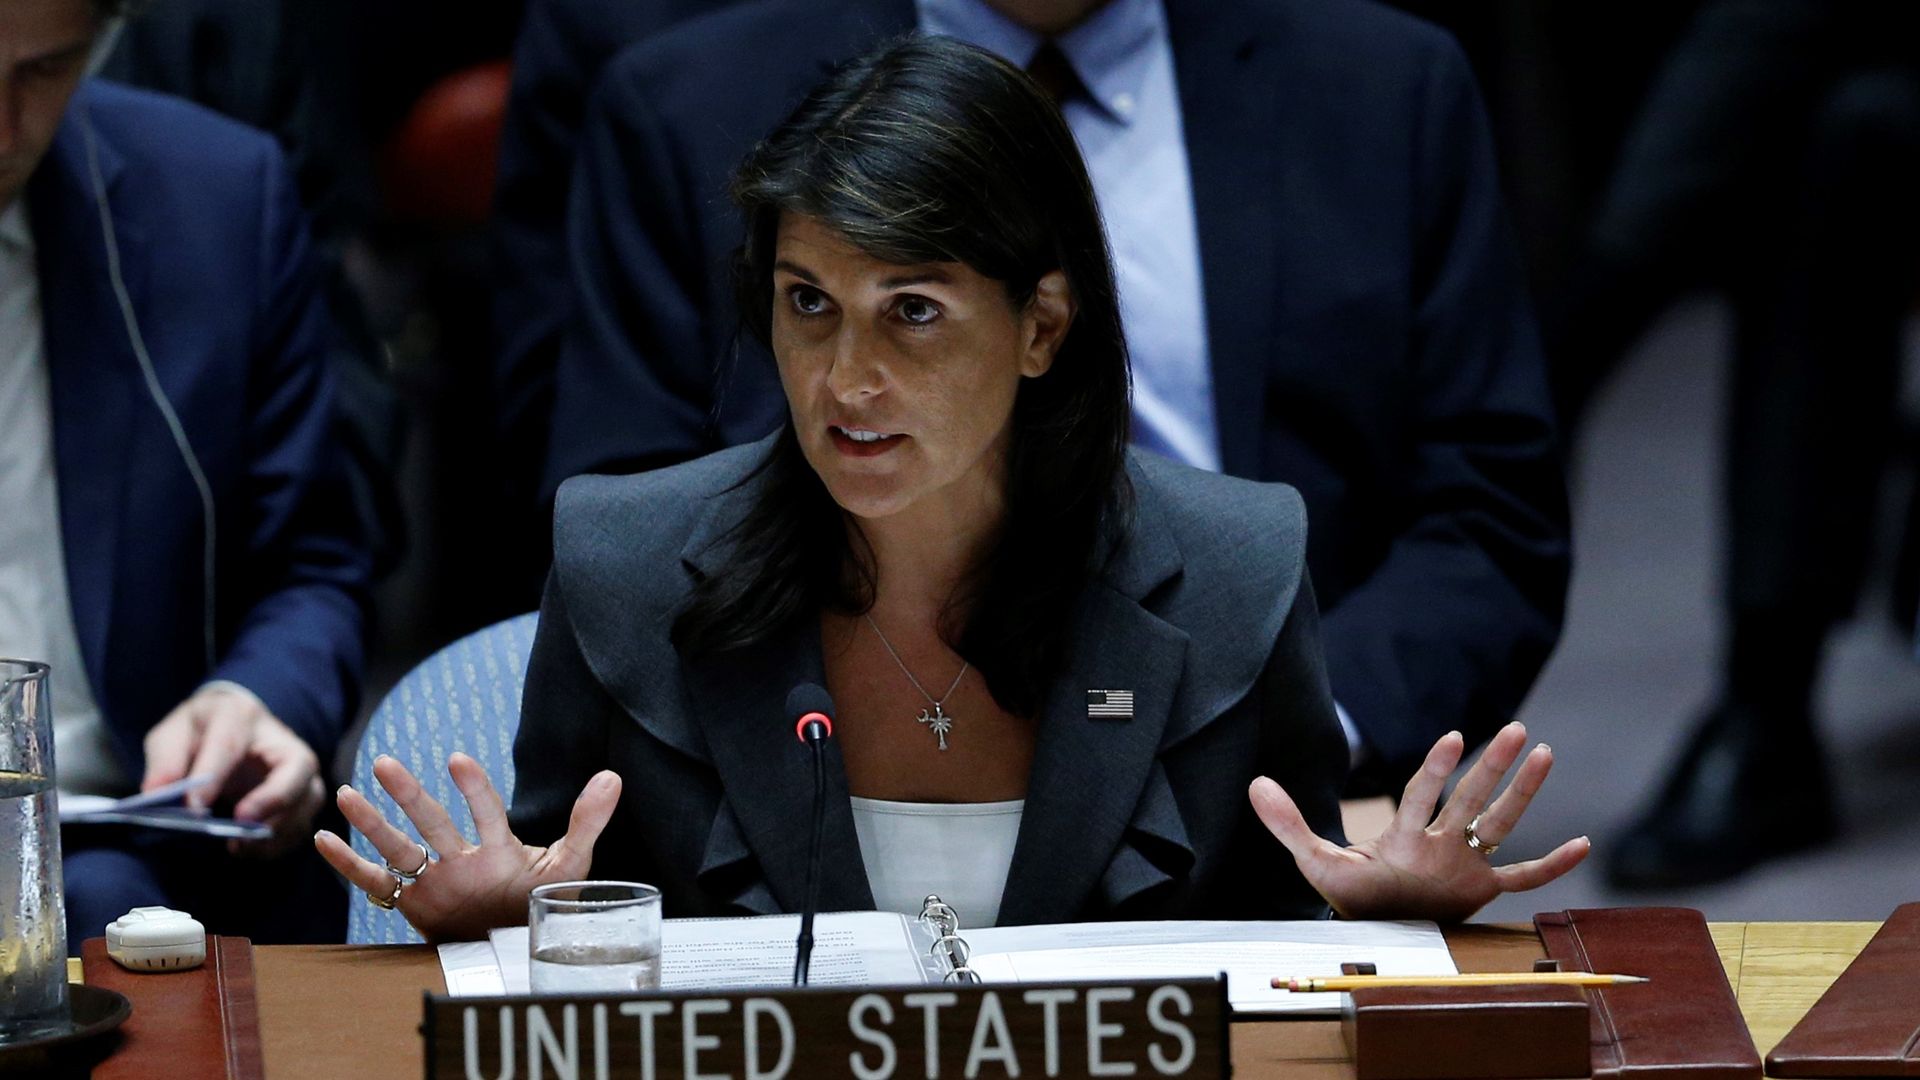 Nikki Haley puts her hands up while speaking behind the United States podium during a U.N. meeting